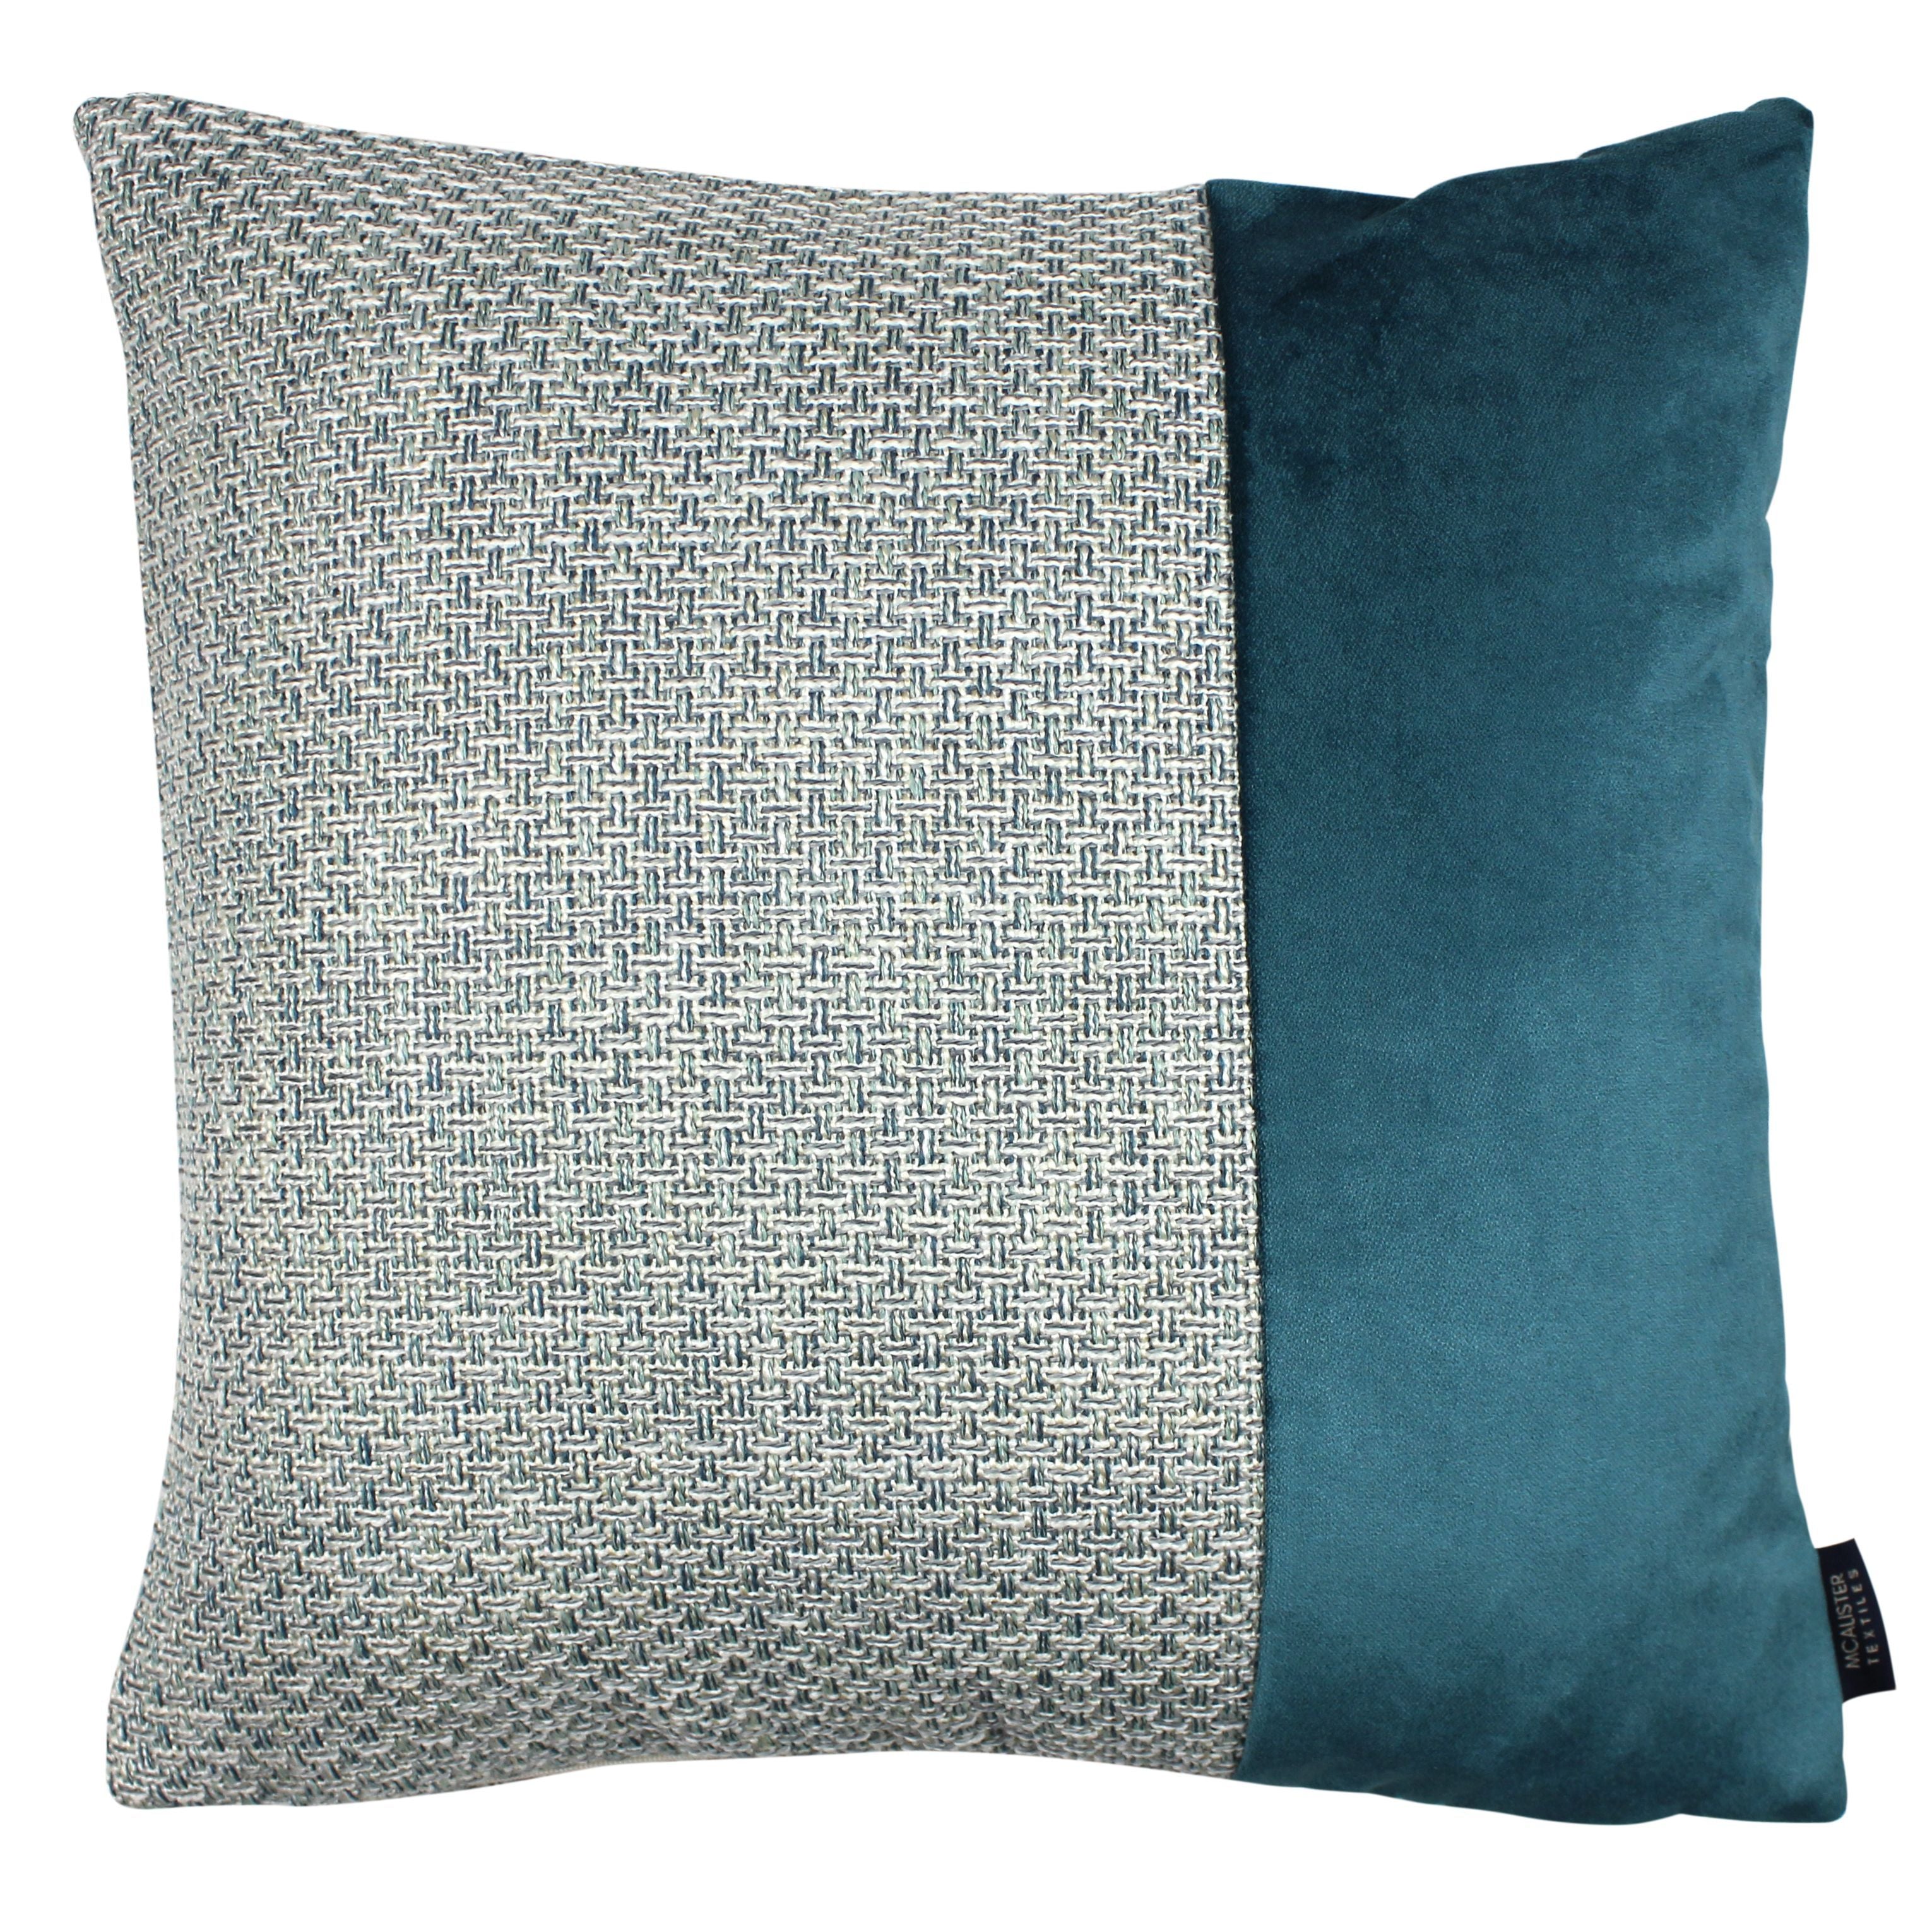 McAlister Textiles Skye Velvet Border Tweed Cushion - Teal Cushions and Covers Cover Only 43cm x 43cm 